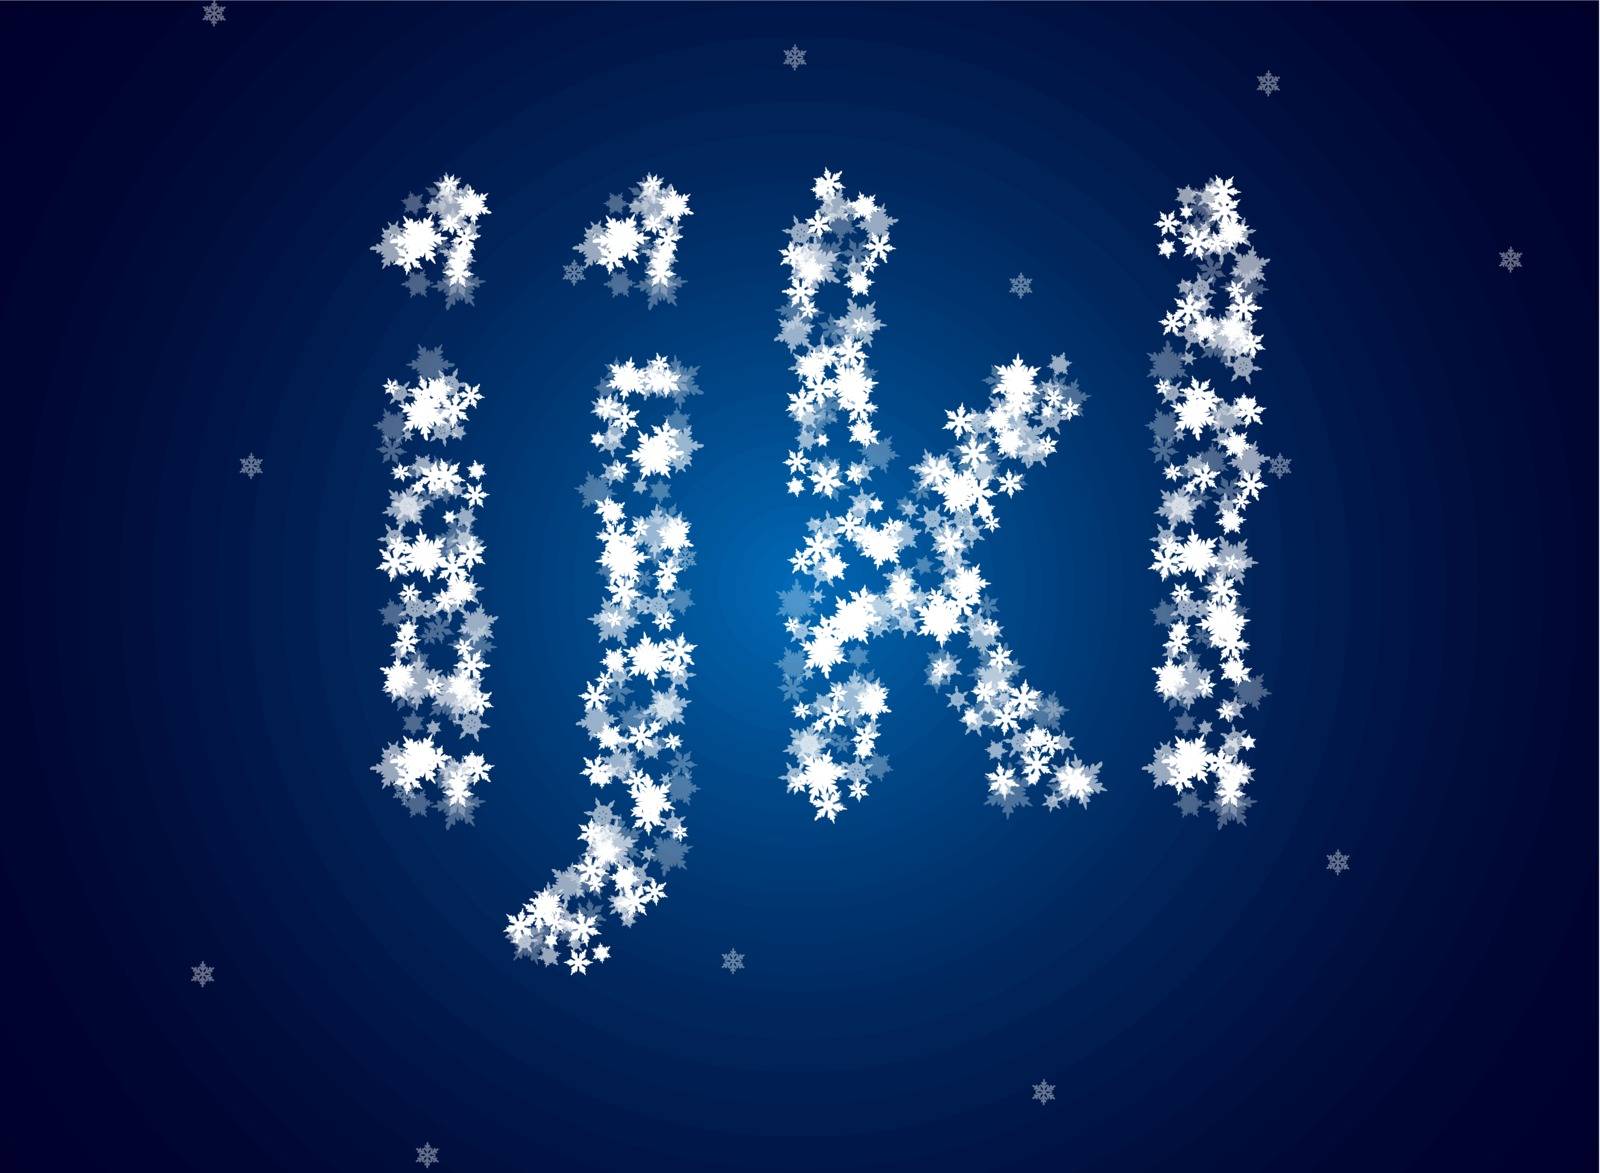 Snow letters over snow background